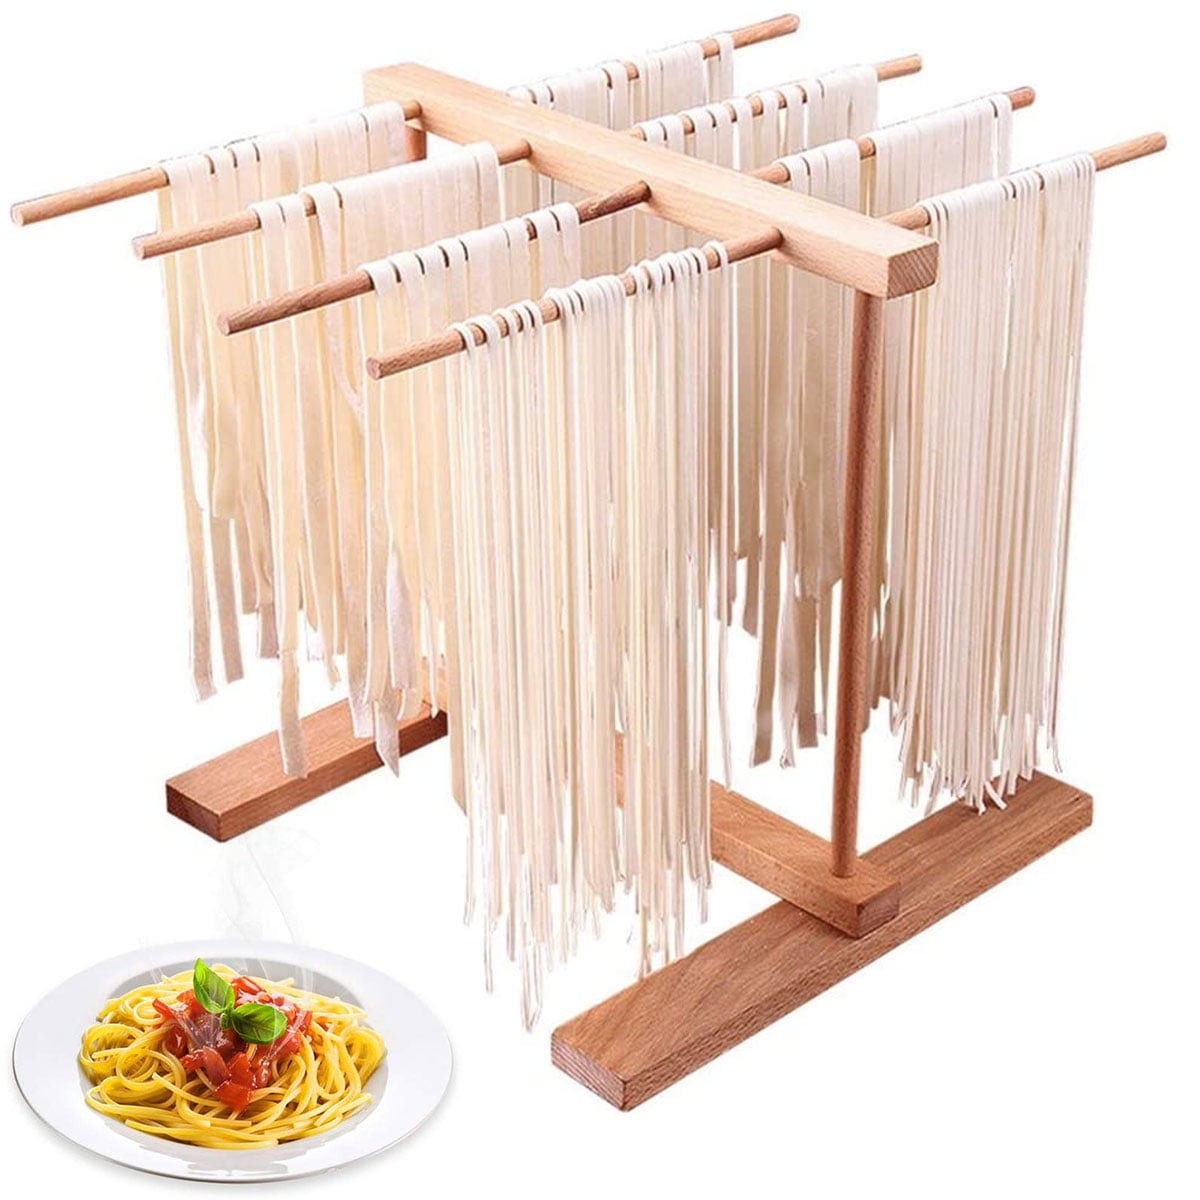  KITCHENDAO Collapsible Pasta Drying Rack, Foldable for